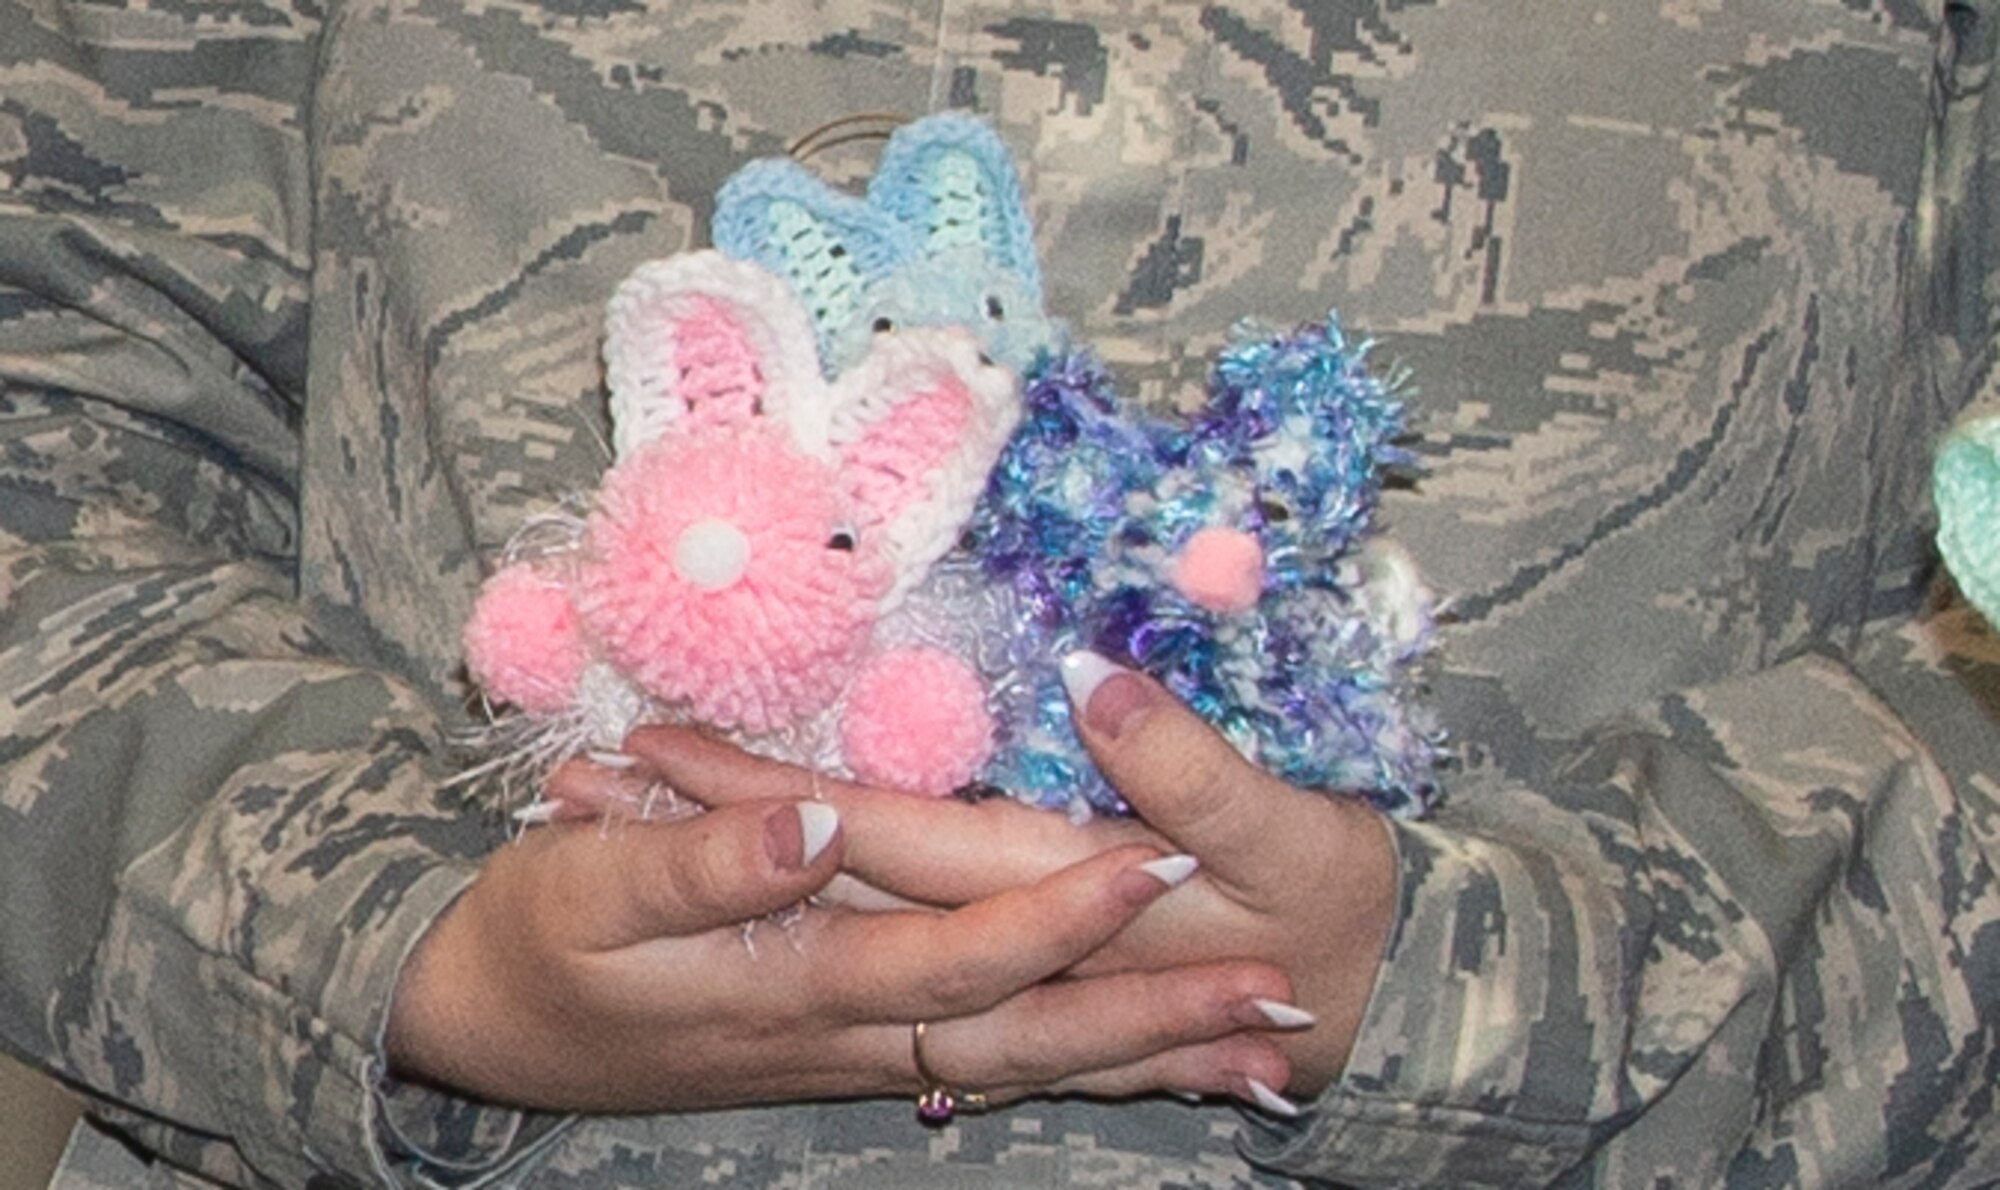 Hand crocheted bunnies, held by Airman 1st Class Julie Hubble, 55th Comptroller Squadron, financial services technician, July 1, 2019, at Offutt Air Force Base, Nebraska. Hubble’s grandmother, Sally Harder, enjoys crafting items for military family members and friends. Harder has been sending crafts to military family members for decades, crafting over 100 per year.